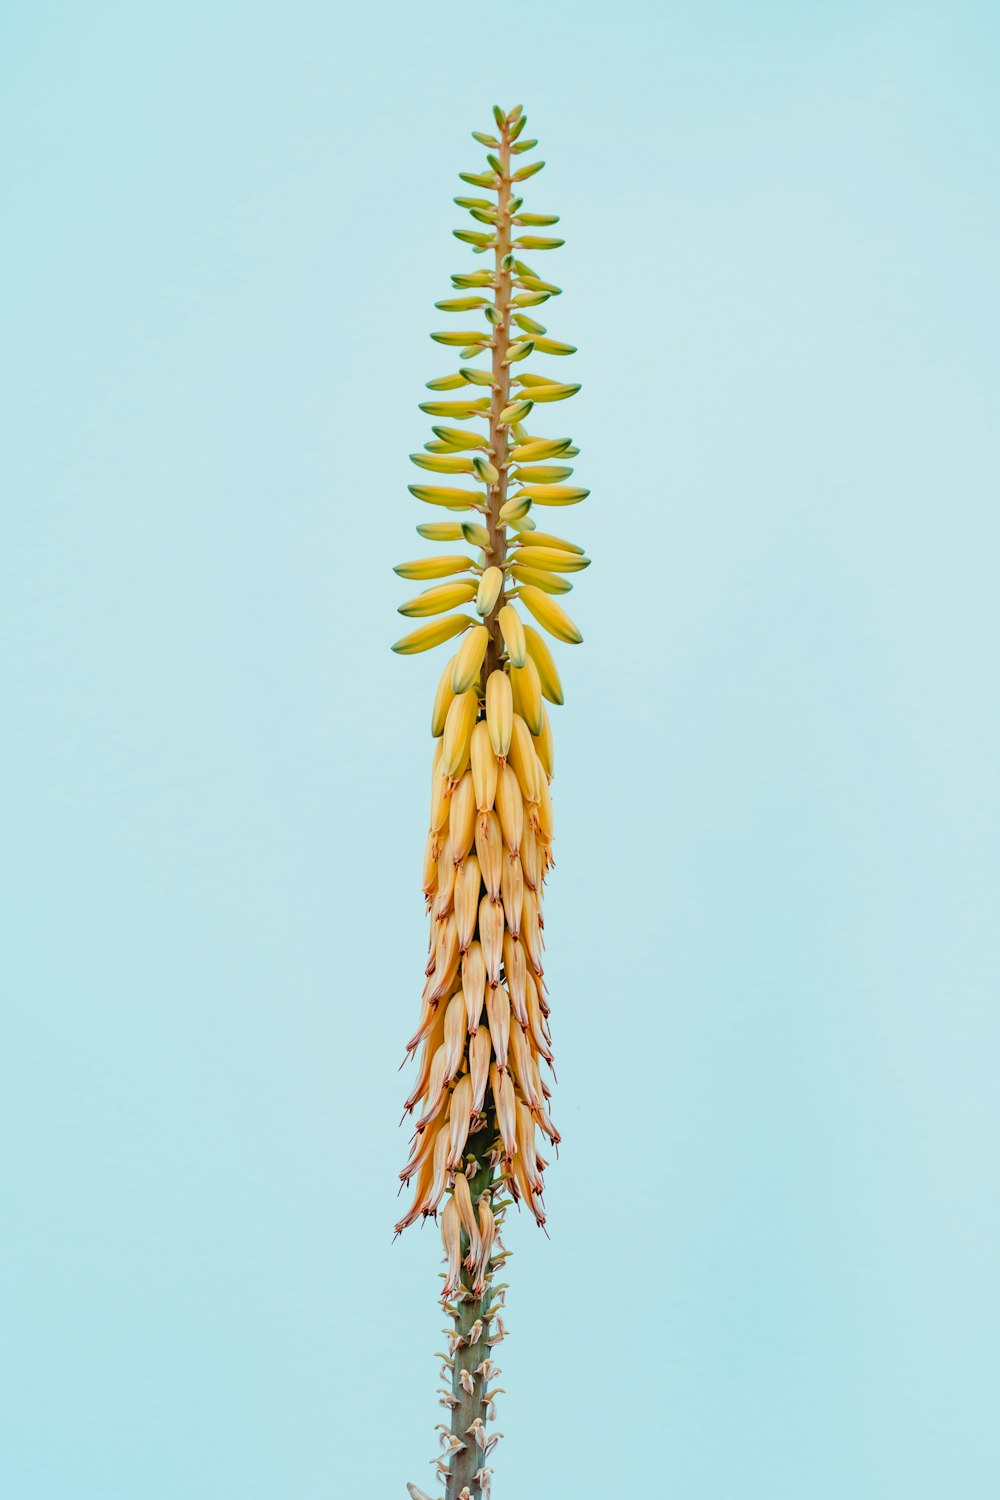 a plant with yellow flowers on a blue background